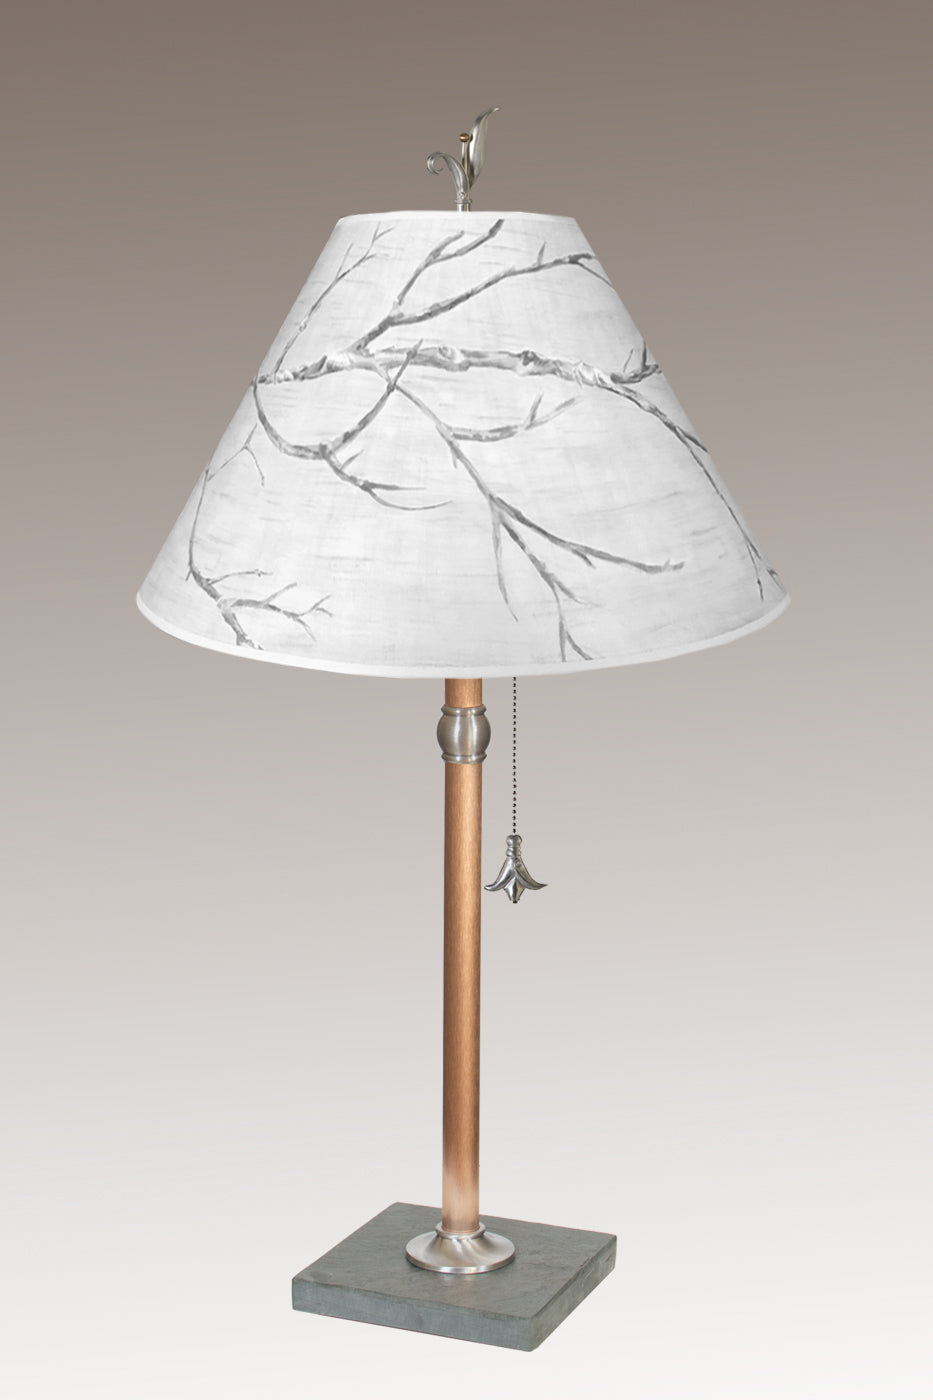 Janna Ugone &amp; Co Table Lamps Copper Table Lamp with Medium Conical Shade in Sweeping Branch